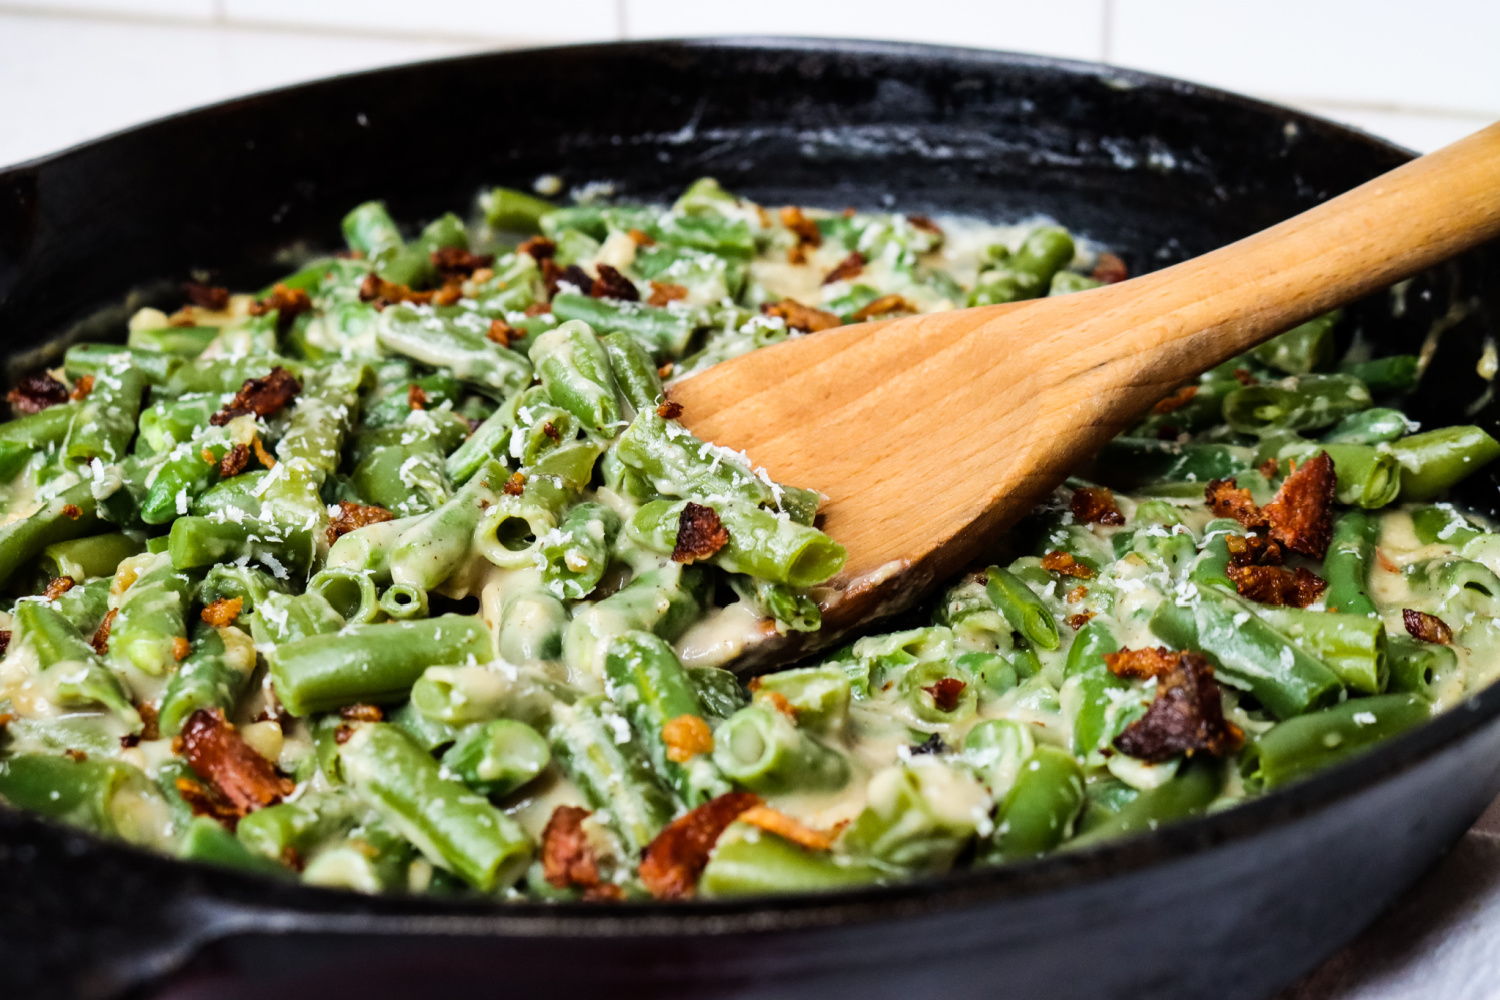 Cast iron skillet with green bean casserole and a wooden spoon.